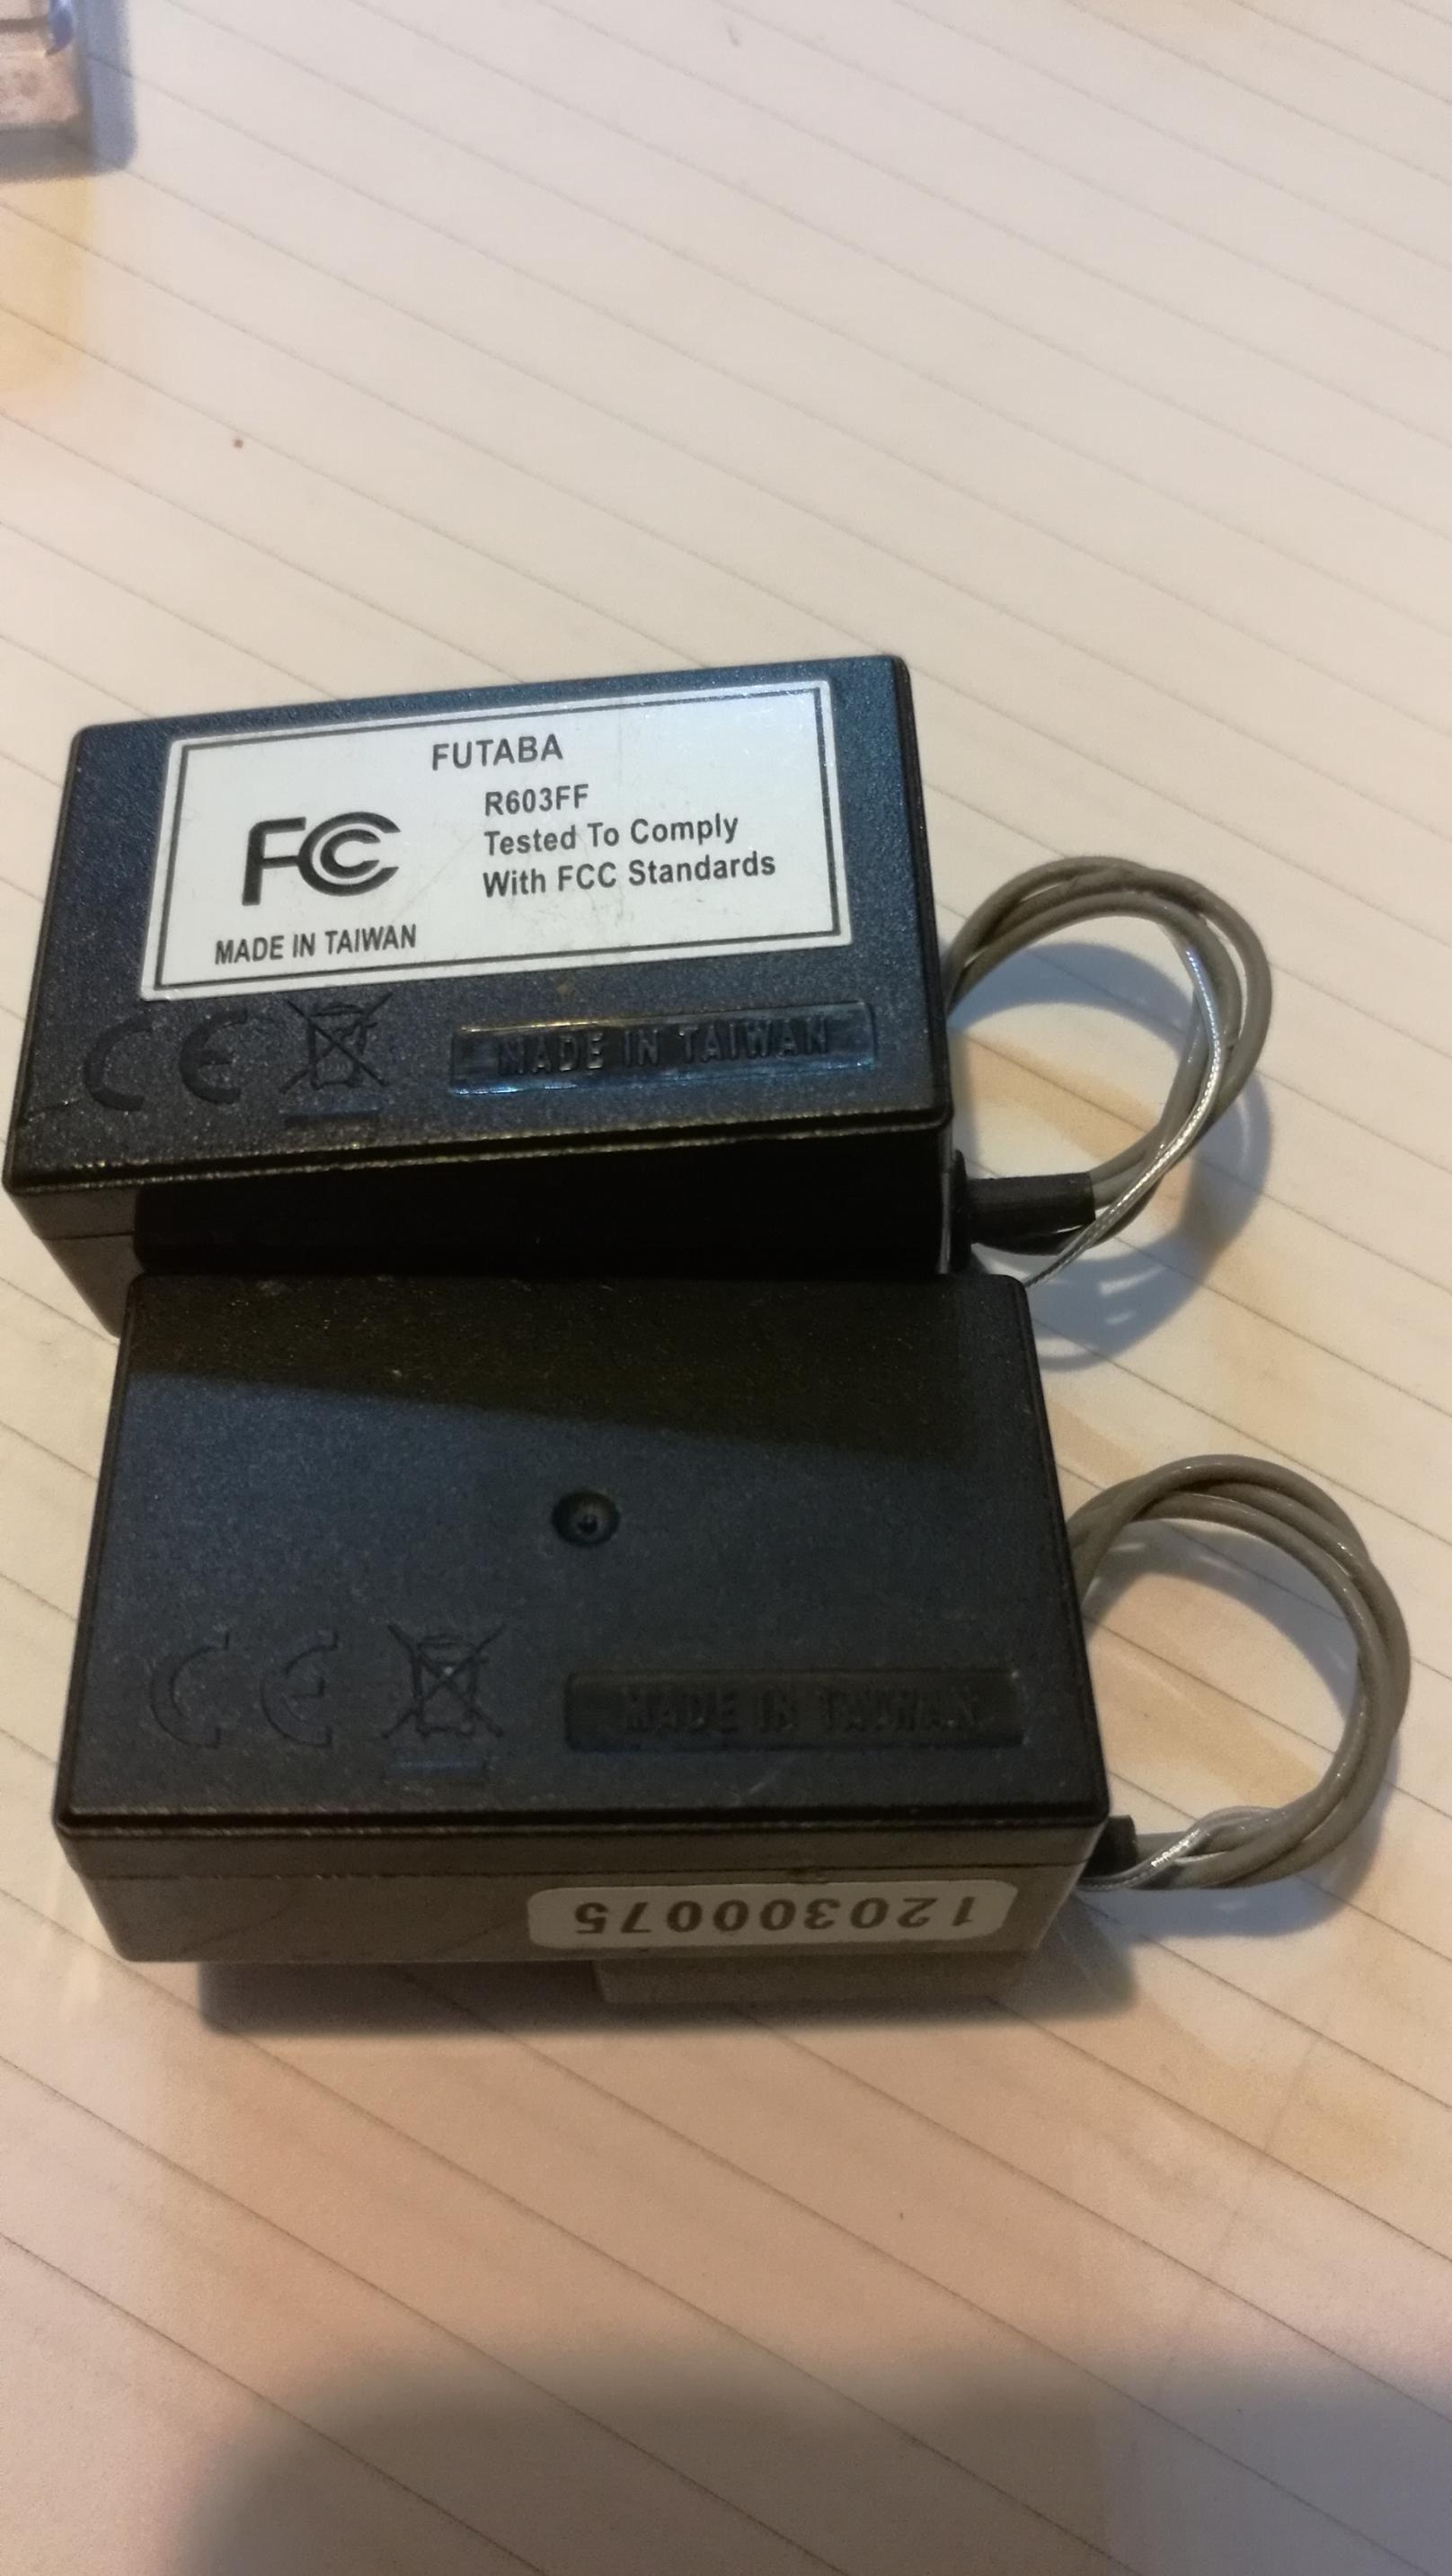 NEW Futaba R603FF and R603FS receivers for sale - R/C Tech Forums